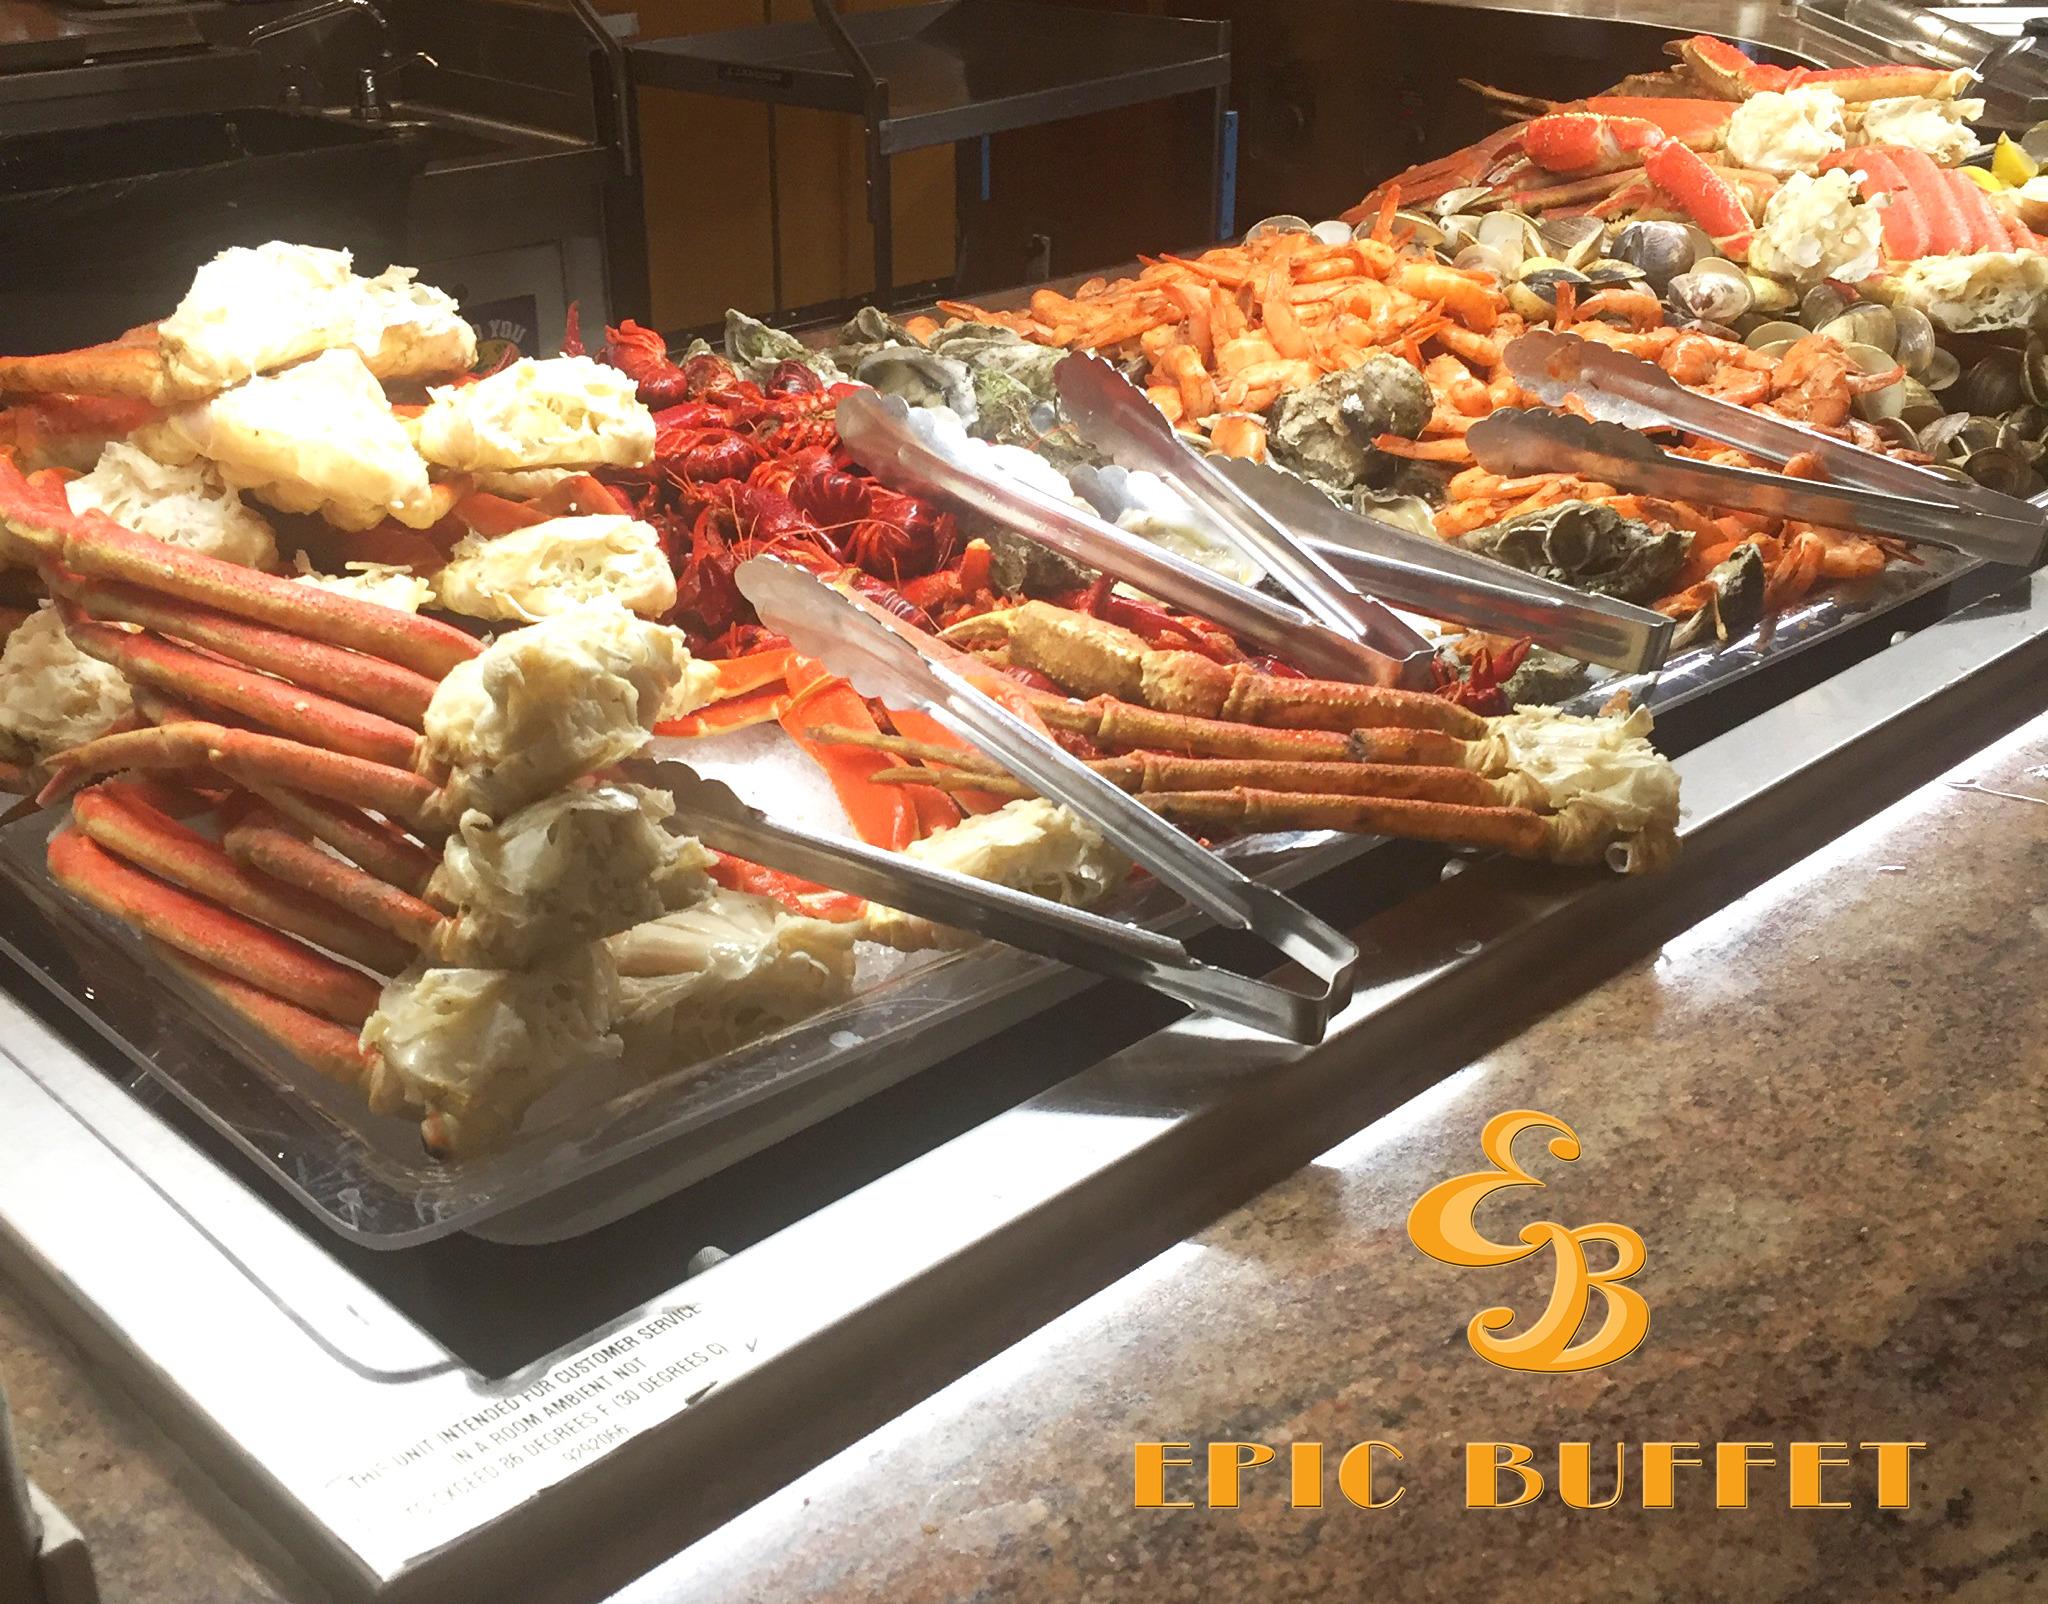 epic buffet at hollywood casino robinsonville ms